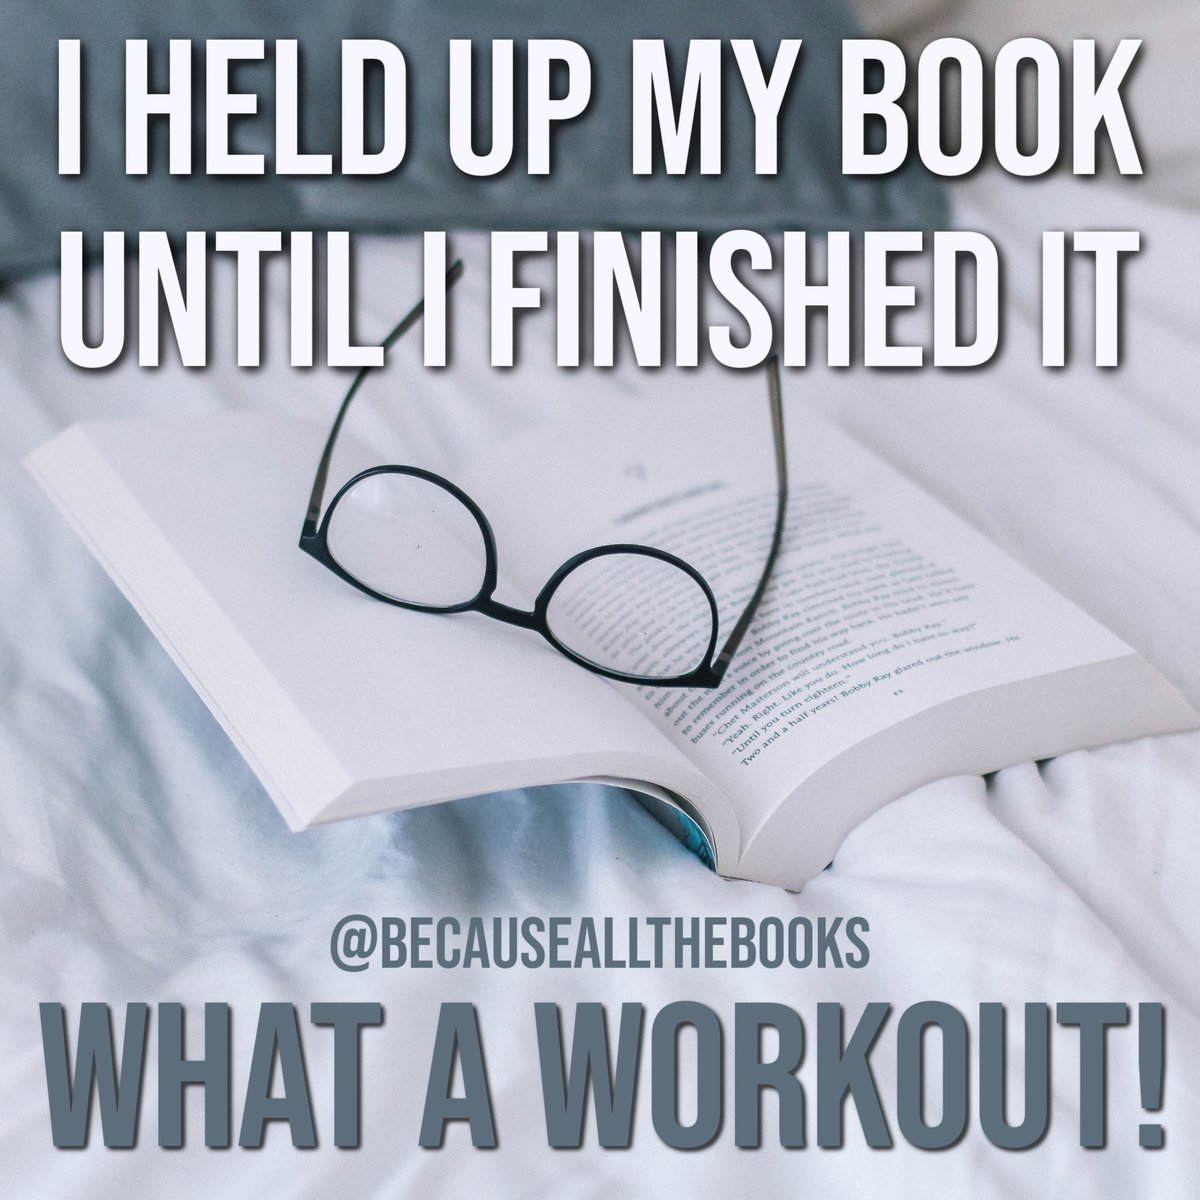 I hate to brag, but my workouts are intense! 📖💪

#BecauseAllTheBooks #FinishedReading #ReadingForLife #BooksAreMyLife